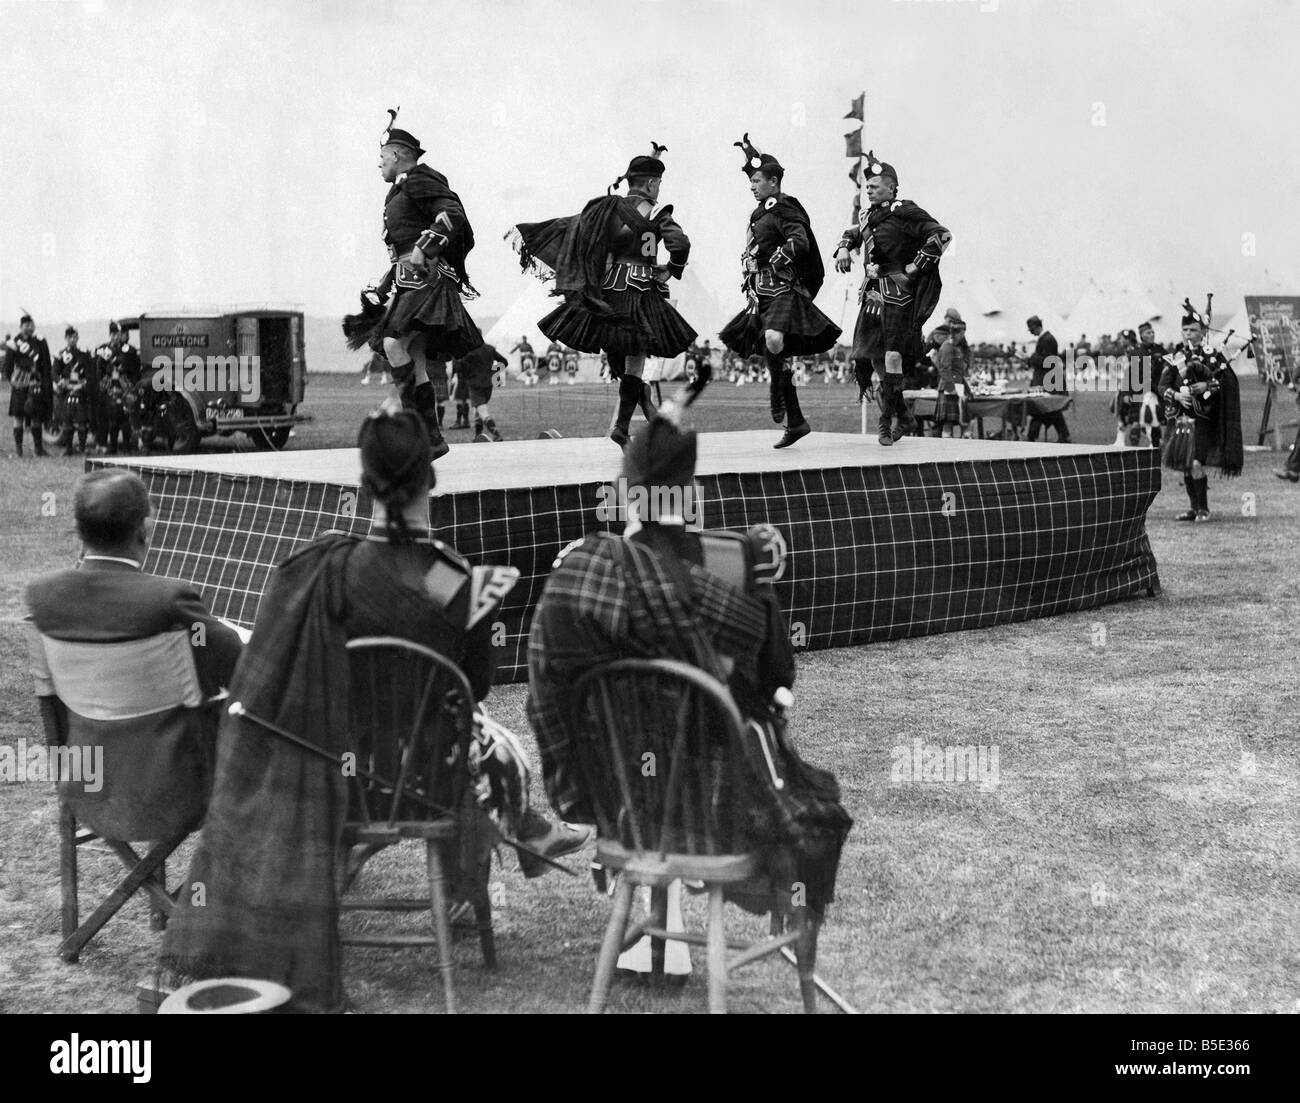 1st Battalion the Seaforth Highlanders. Seen here competing in the Foursome Reel competition at the Regimental highland games. The judges in foreground. June 1929 P001865 Stock Photo